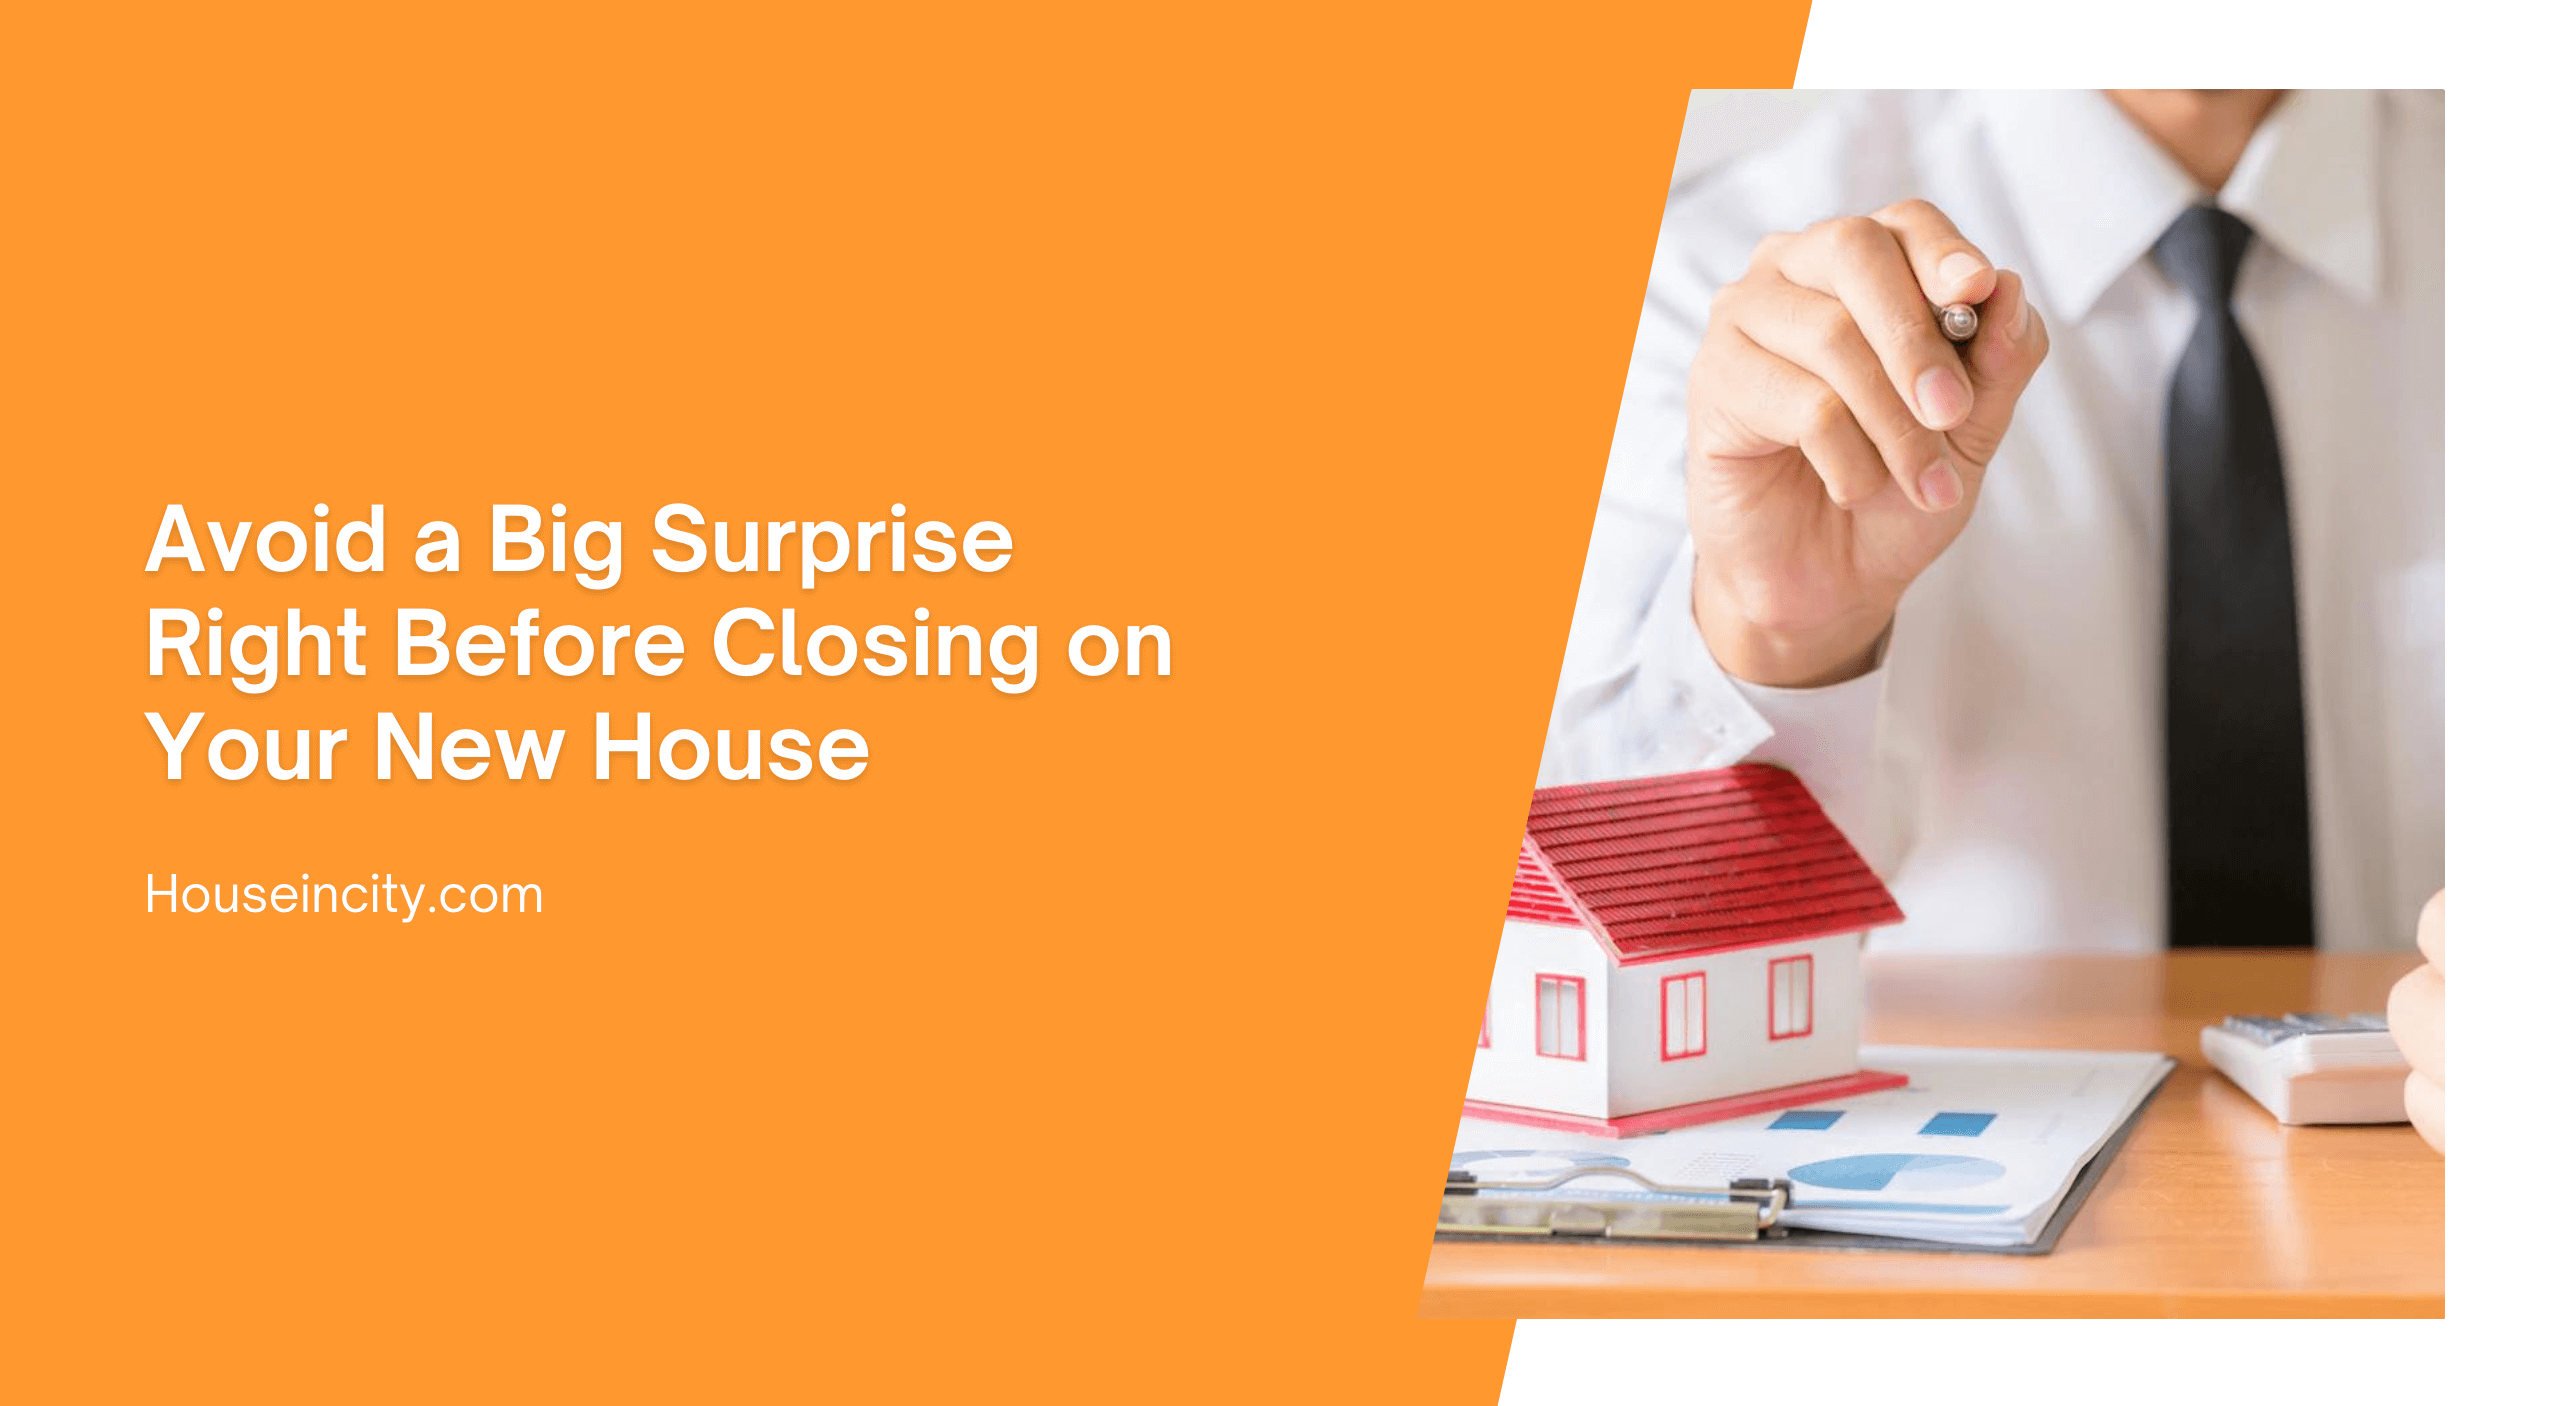 Avoid a Big Surprise Right Before Closing on Your New House